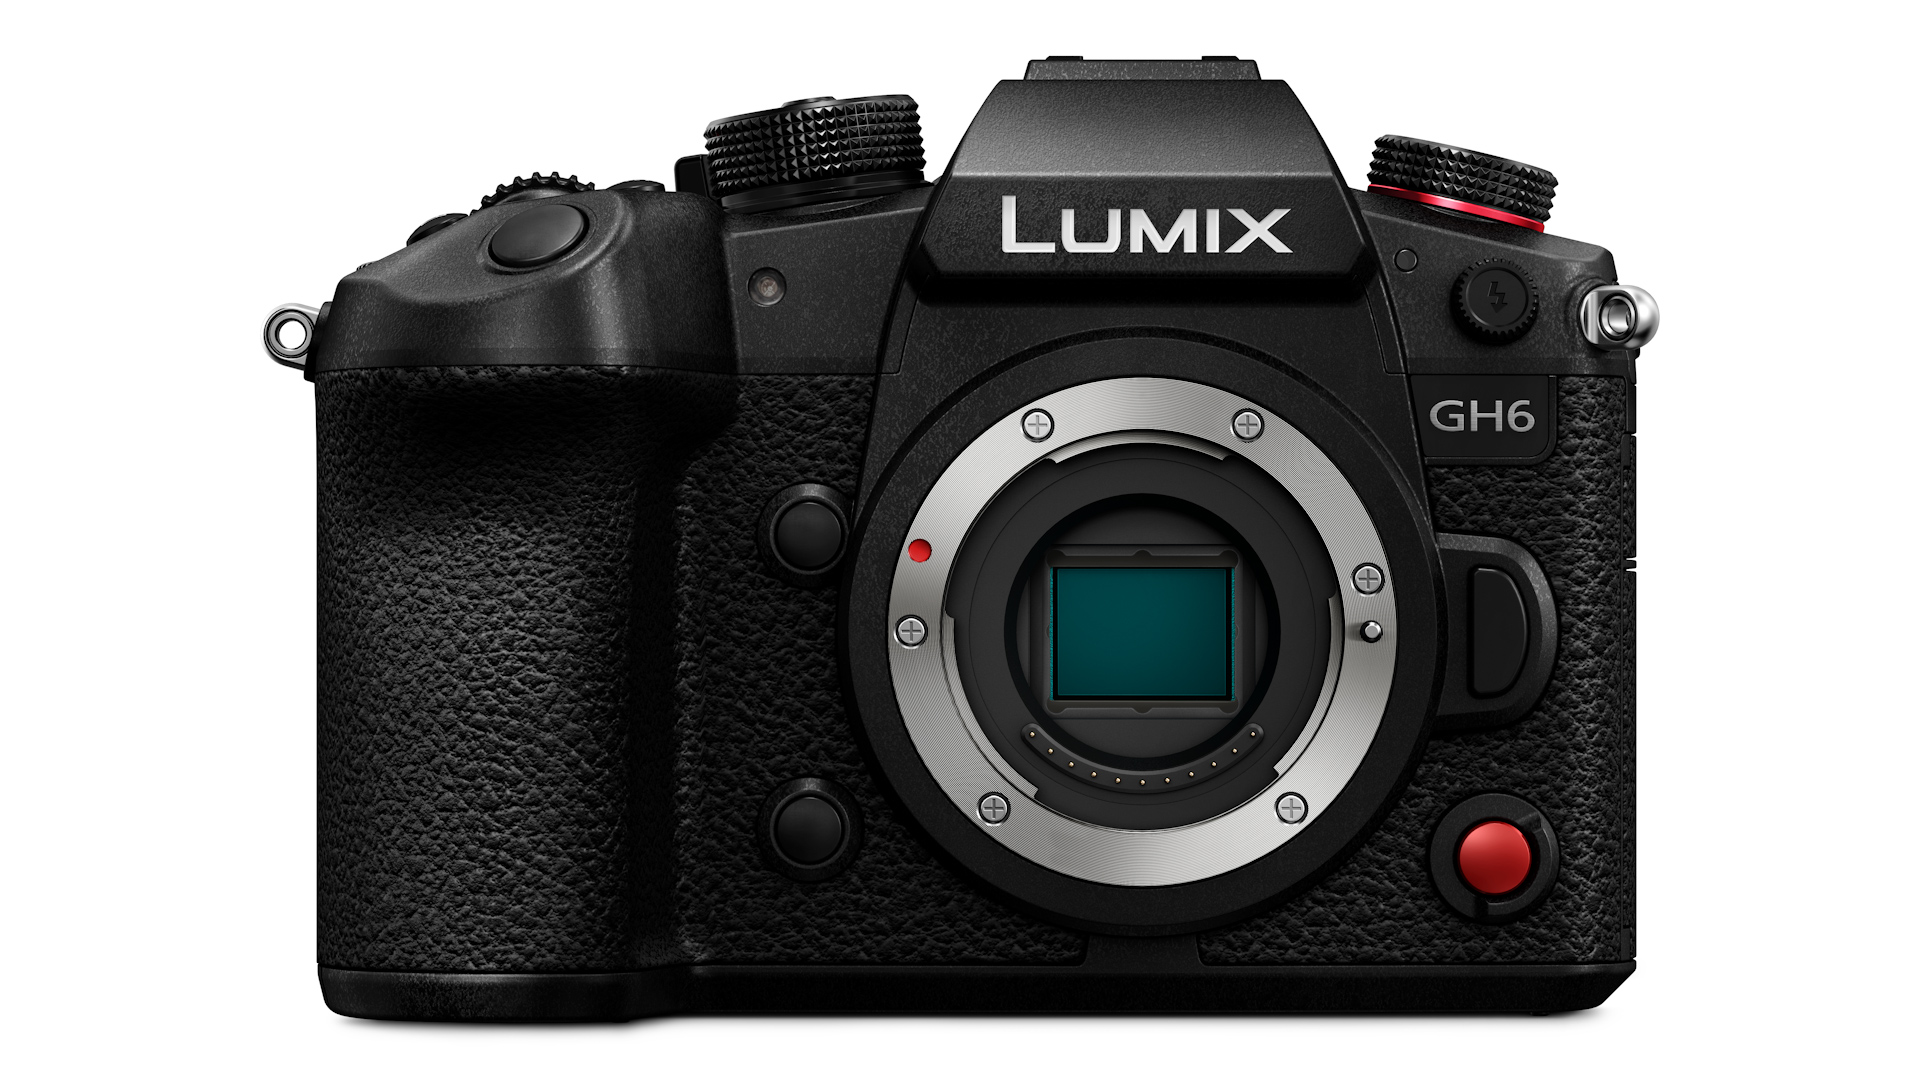 Panasonic GH6 Announced - 5.7K60, Internal ProRes, Up to 300FPS Slow Motion | CineD